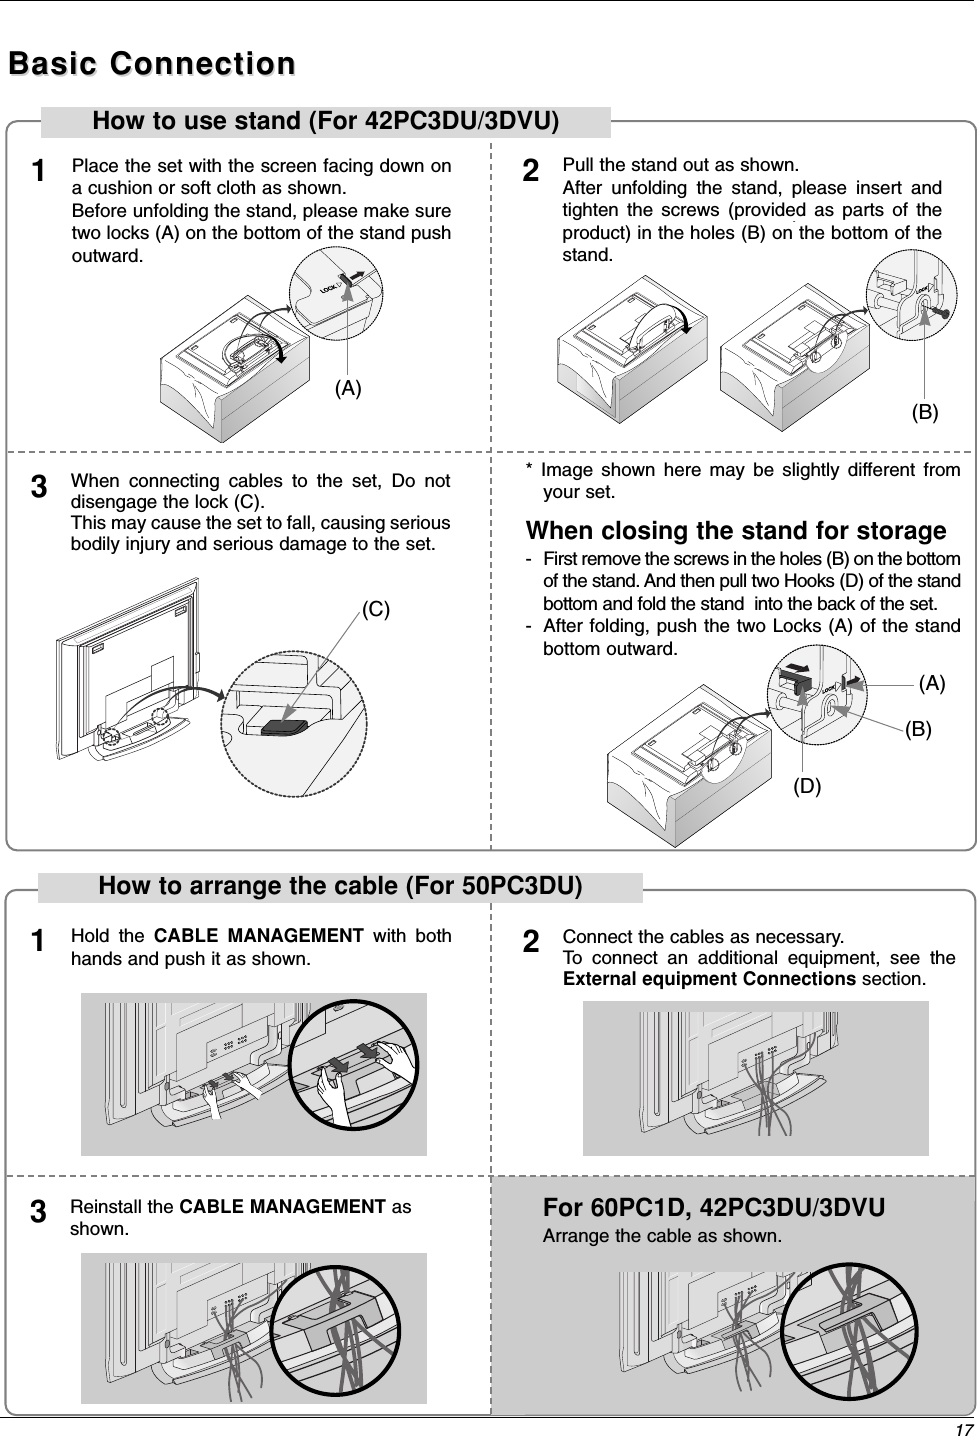 17Place the set with the screen facing down ona cushion or soft cloth as shown.Before unfolding the stand, please make suretwo locks (A) on the bottom of the stand pushoutward.Pull the stand out as shown.After unfolding the stand, please insert andtighten the screws (provided as parts of theproduct) in the holes (B) on the bottom of thestand.12When connecting cables to the set, Do notdisengage the lock (C).This may cause the set to fall, causing seriousbodily injury and serious damage to the set.3Basic ConnectionBasic Connection(C)Hold the CABLE MANAGEMENT with bothhands and push it as shown.Connect the cables as necessary.To connect an additional equipment, see theExternal equipment Connections section.Reinstall the CABLE MANAGEMENT asshown.123* Image shown here may be slightly different fromyour set.When closing the stand for storage- First remove the screws in the holes (B) on the bottomof the stand. And then pull two Hooks (D) of the standbottom and fold the stand  into the back of the set.- After folding, push the two Locks (A) of the standbottom outward.(A)(B)(D)(A)(B)How to use stand (For 42PC3DU/3DVU)How to arrange the cable (For 50PC3DU)For 60PC1D, 42PC3DU/3DVUArrange the cable as shown.